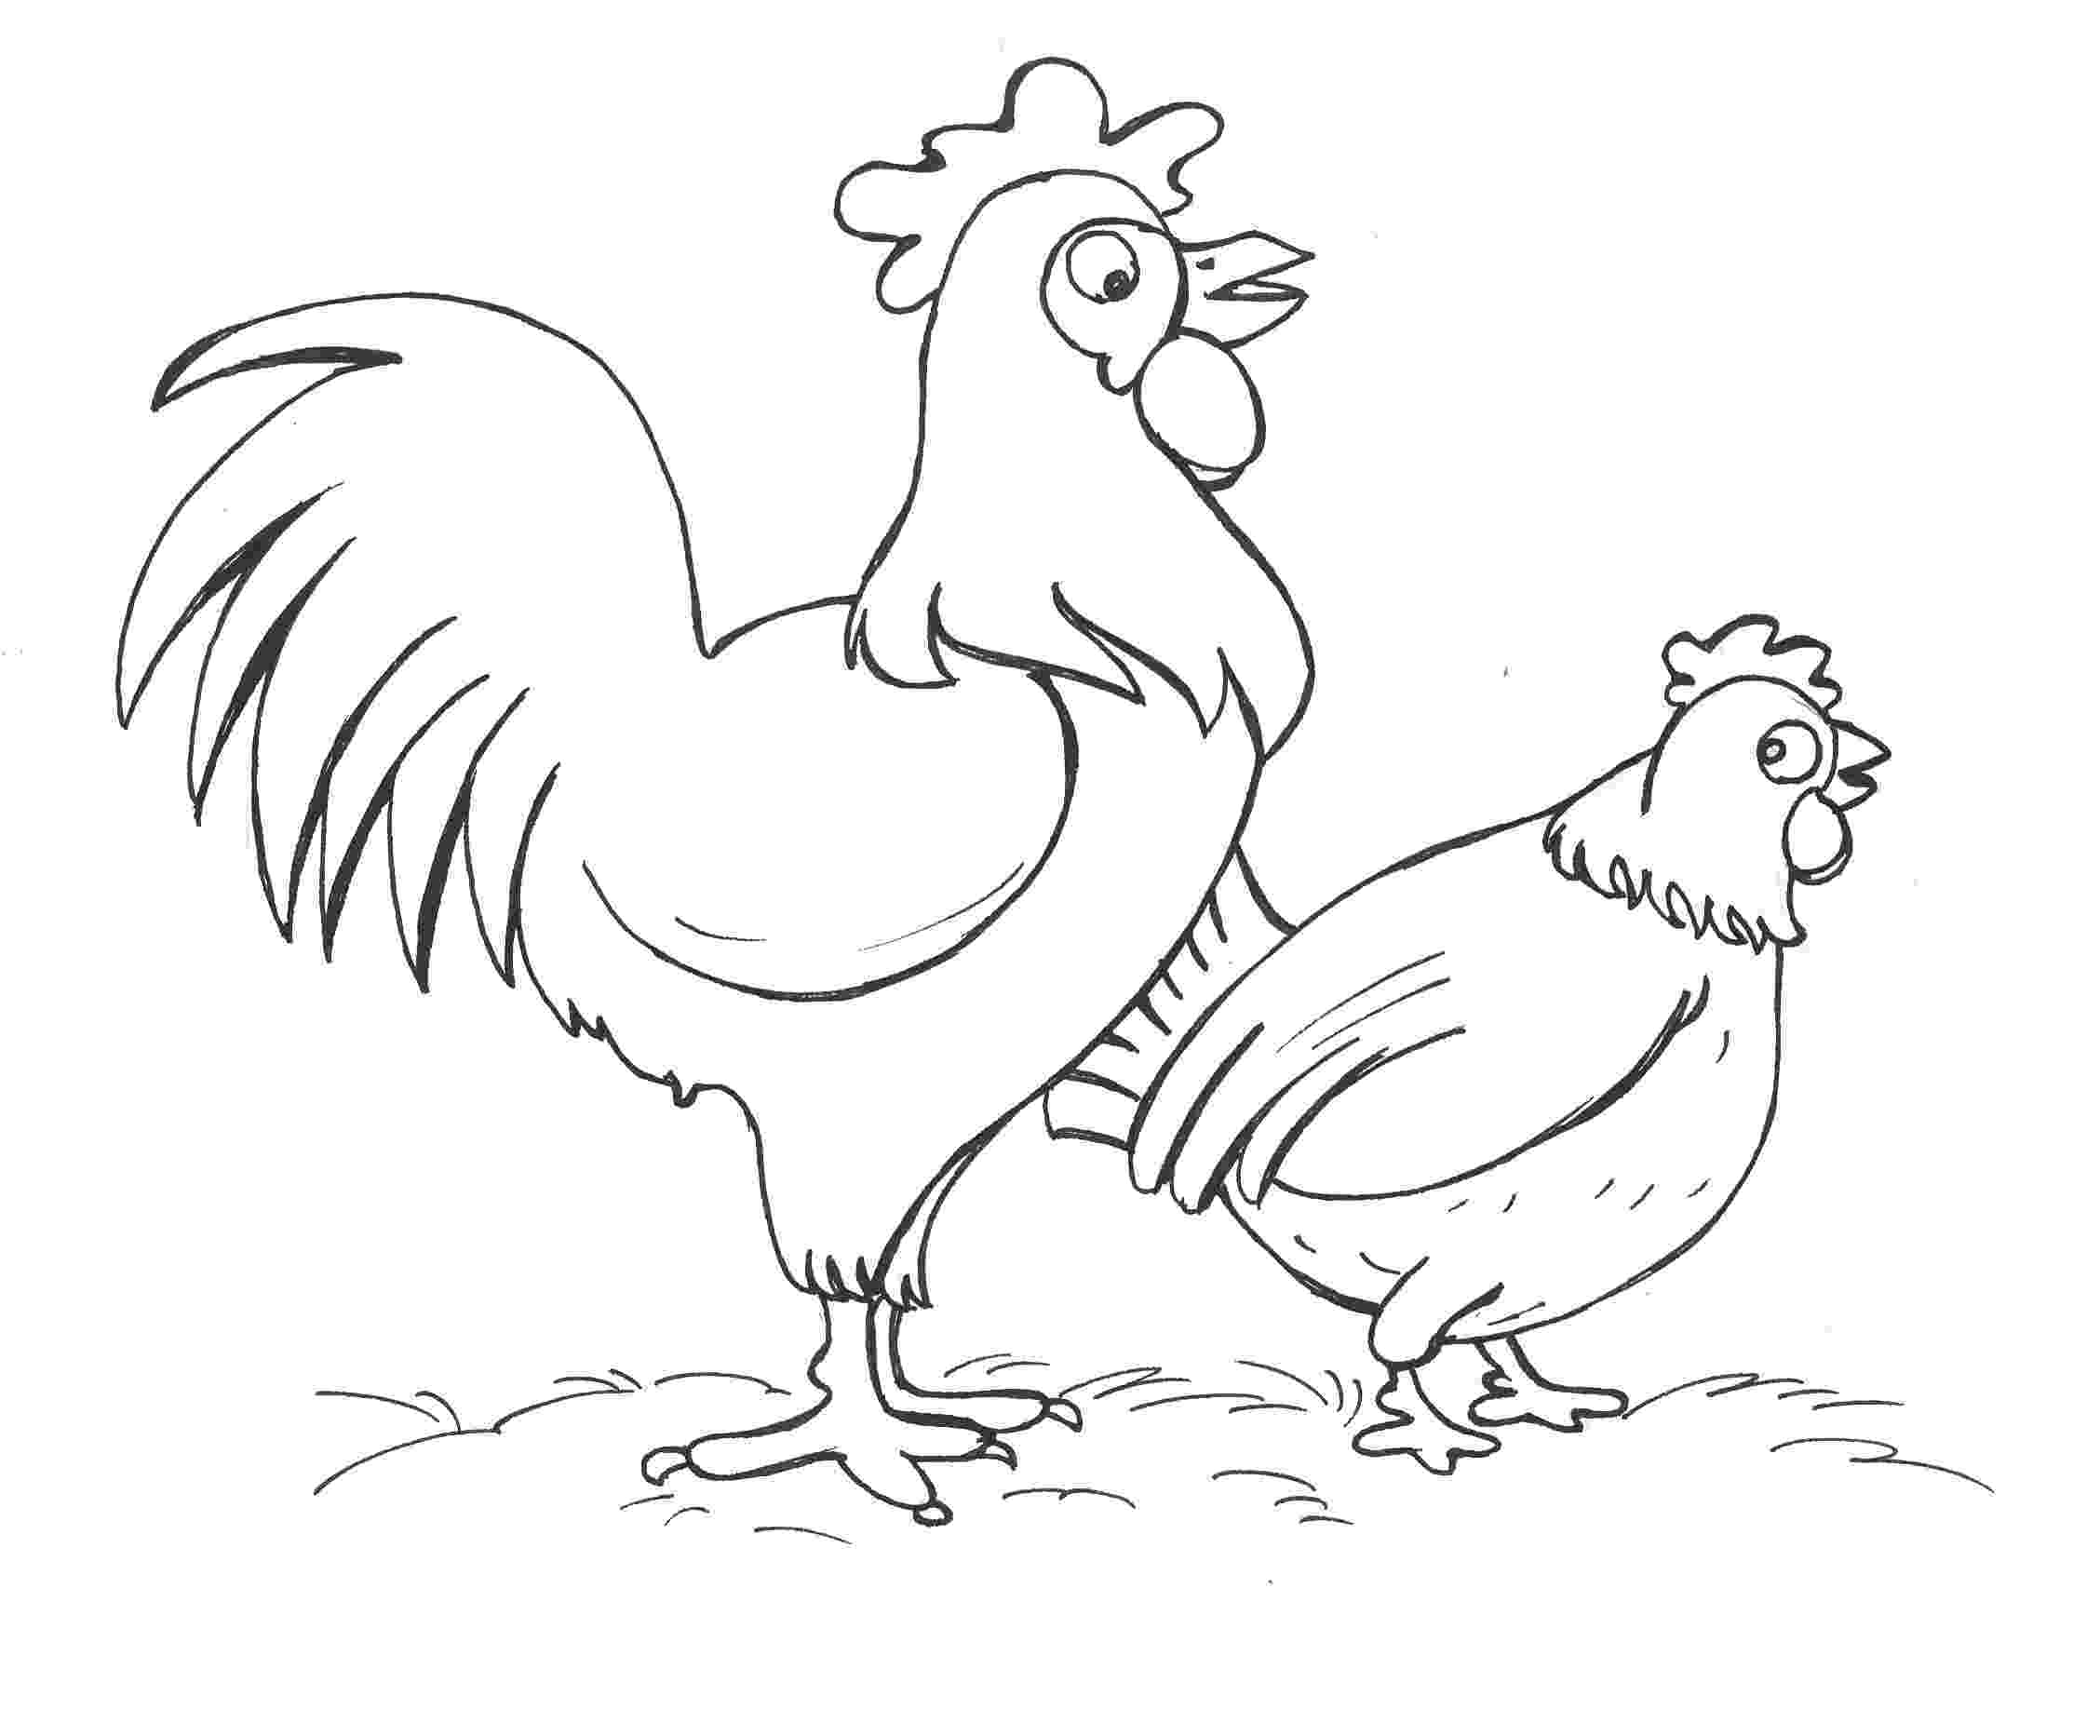 picture of chicken chicken clipart in black and white 101 clip art chicken of picture 